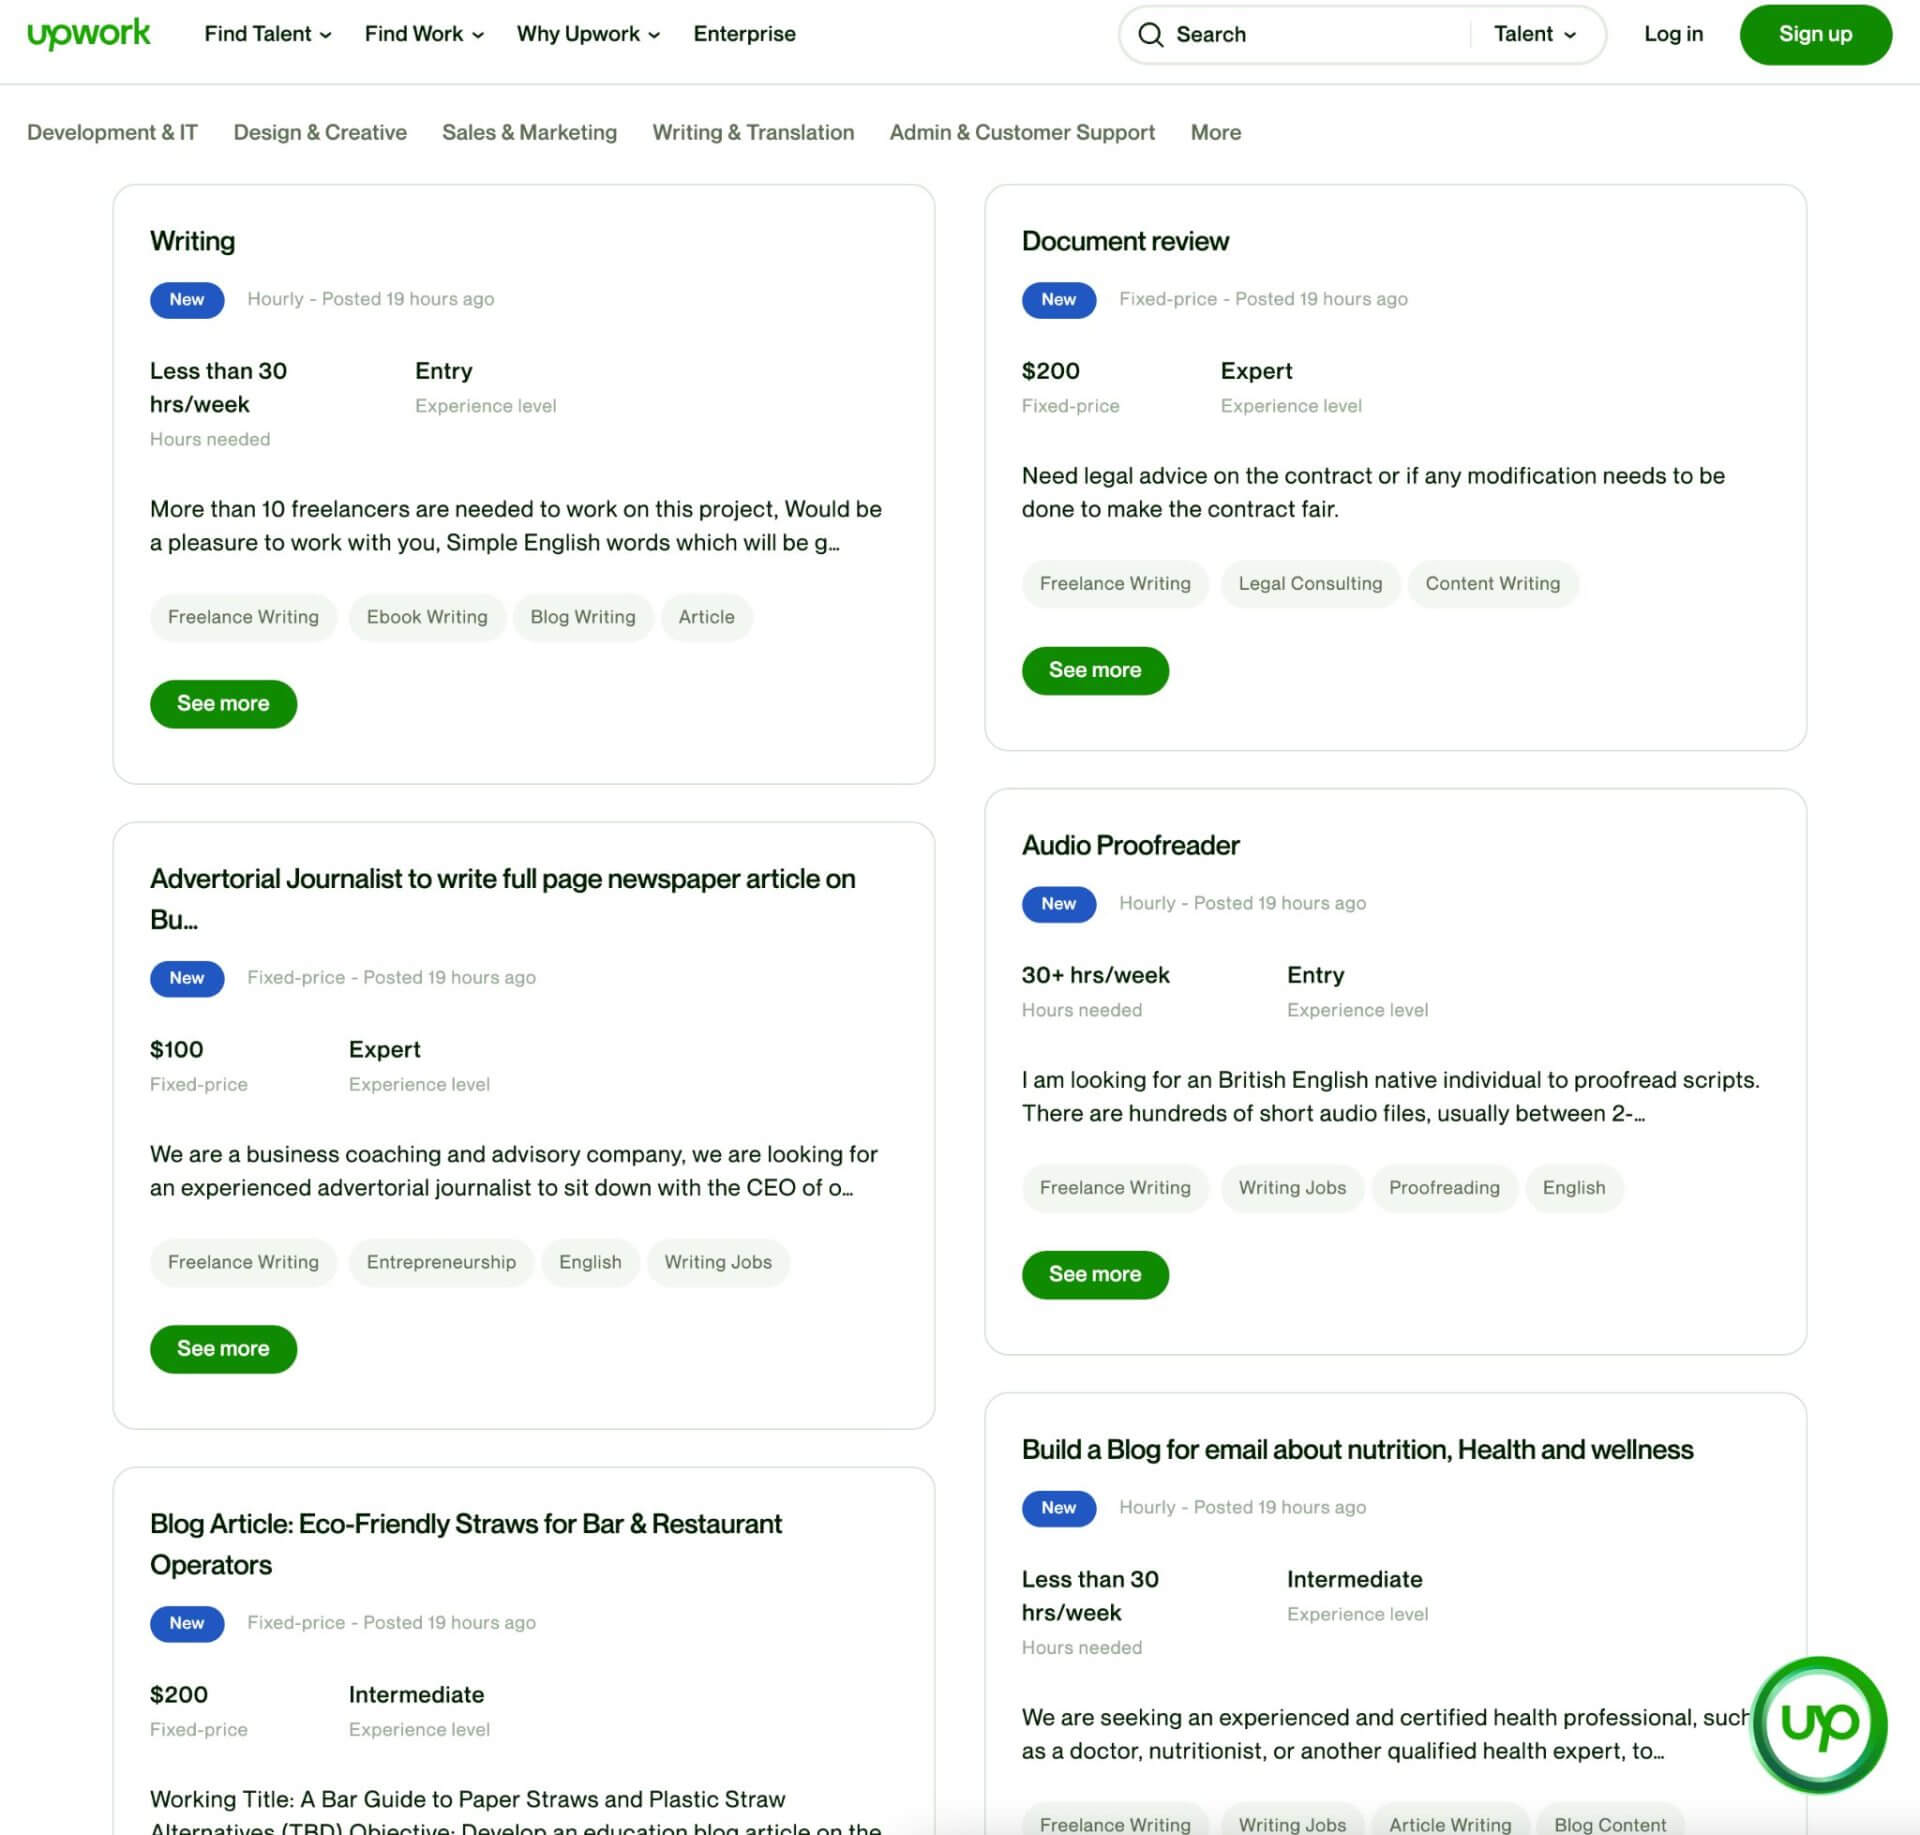 A sample of freelance writing gigs available on Upwork.